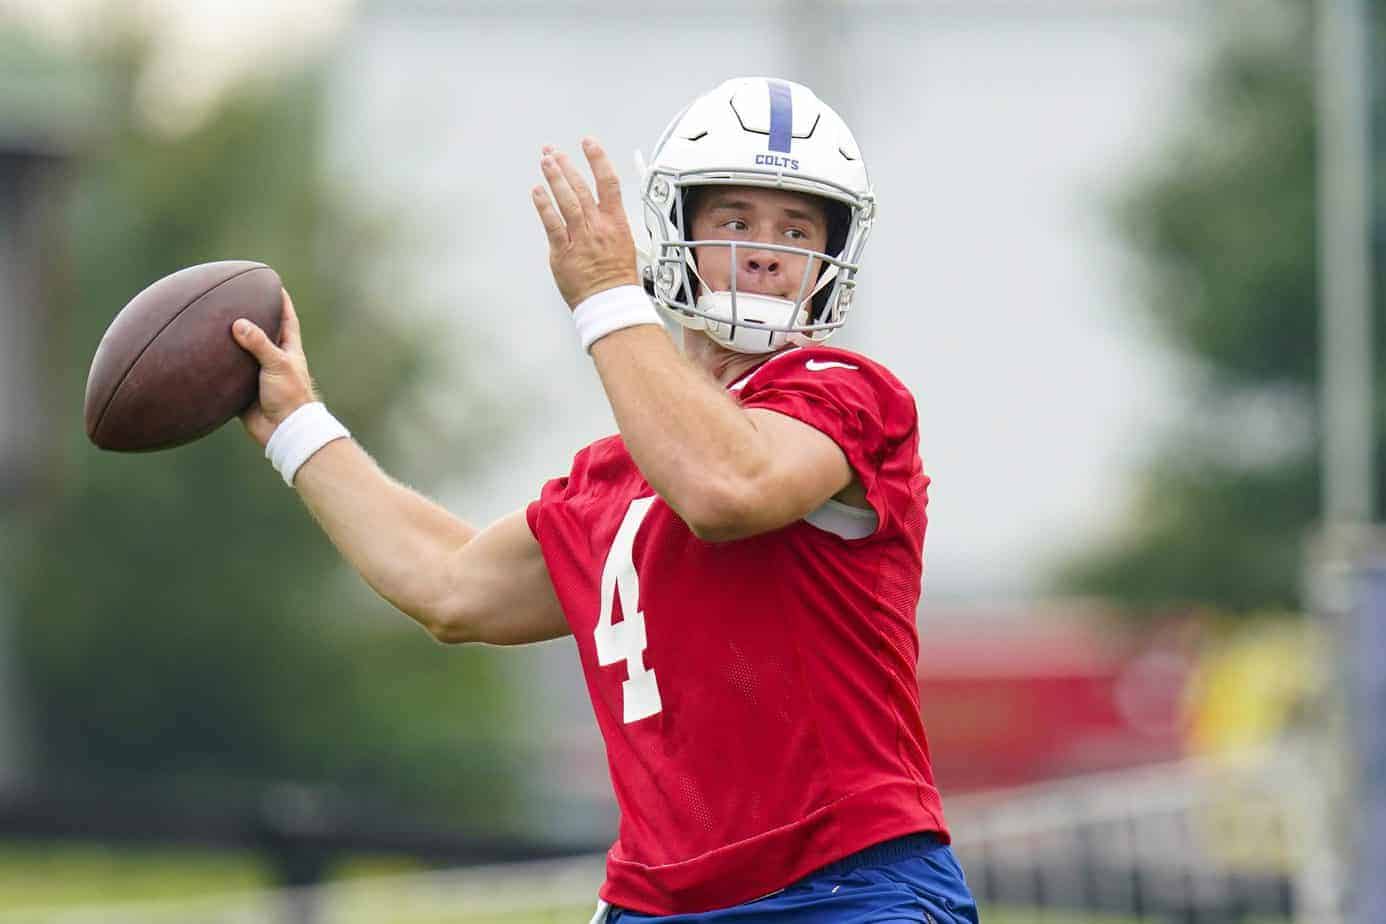 The Indianapolis Colts might be turning to sixth round draft pick Sam Ehlinger under center in the absence of Carson Wentz